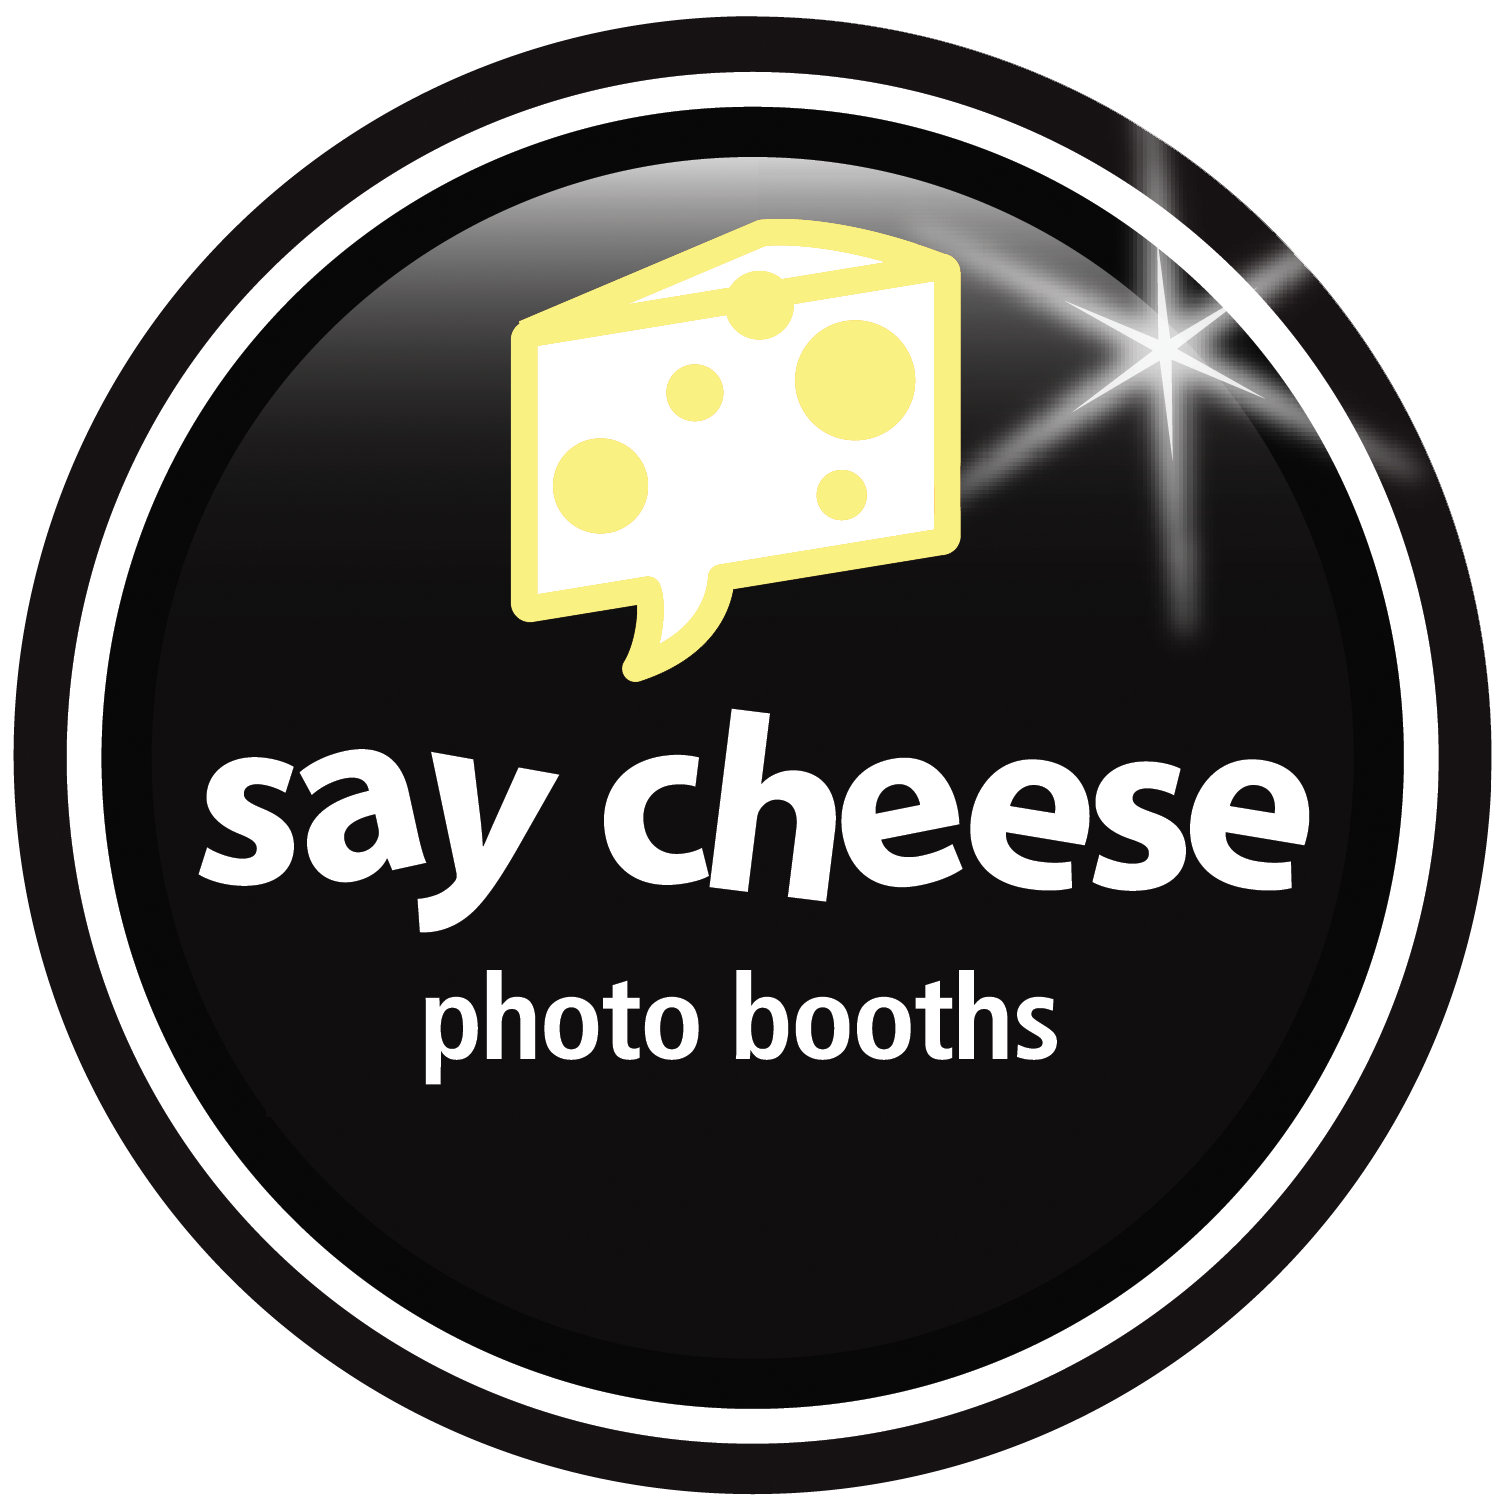 Best Photo Booth Rental In Austin Say Cheese Photo Booths